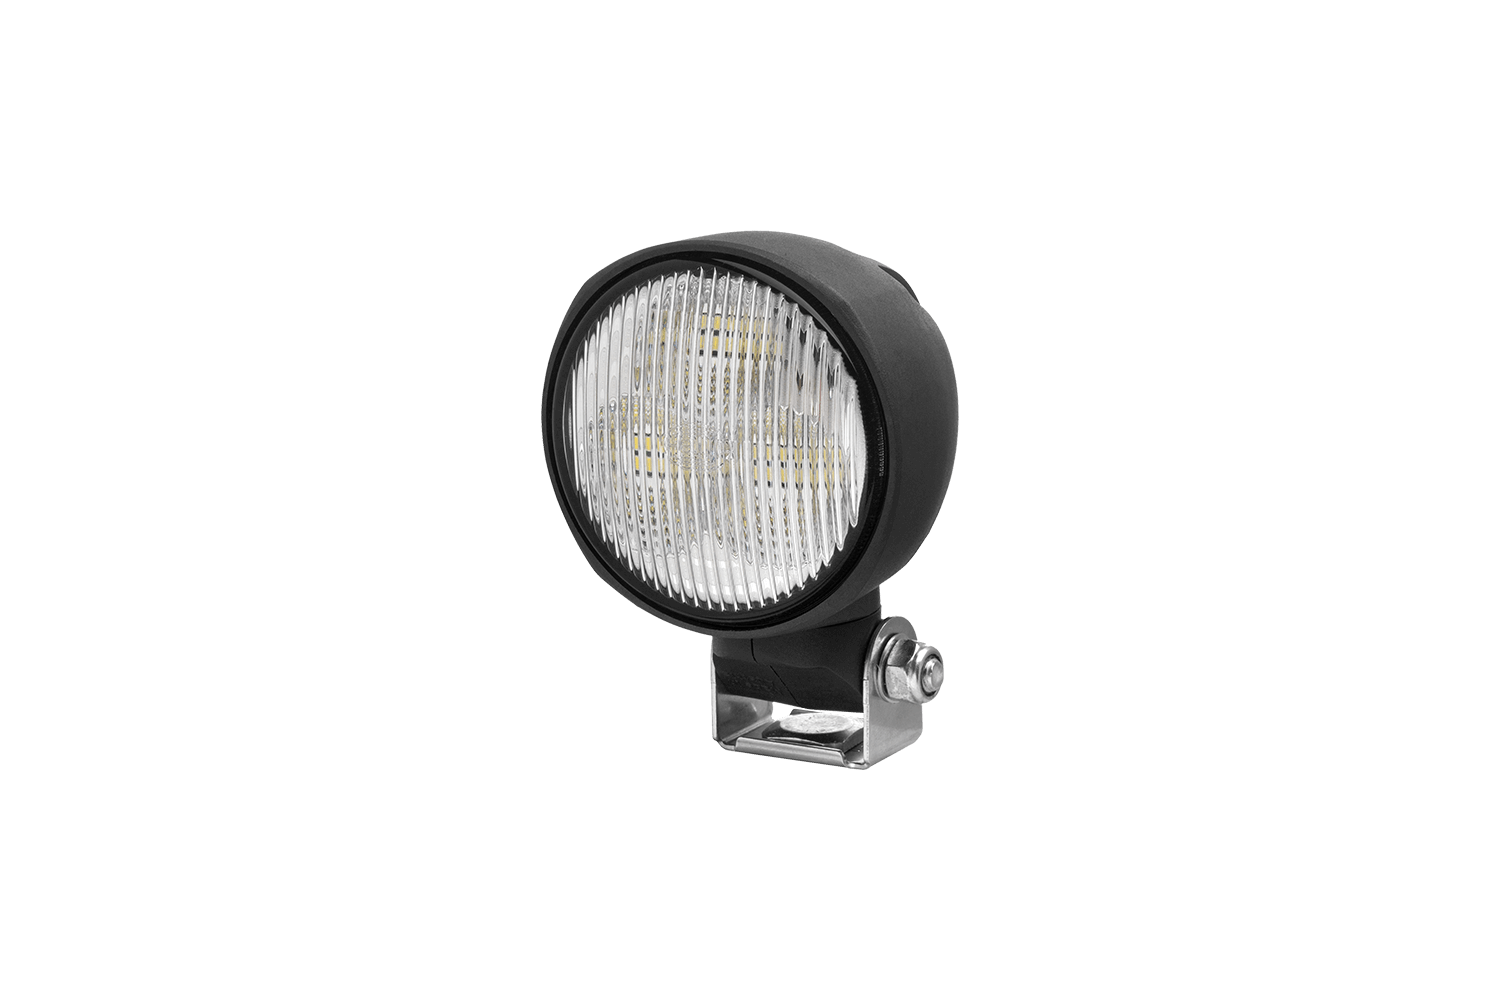 Module 70 LED Generation 3.2 compact reverse lamp from Hella offered by Patlon